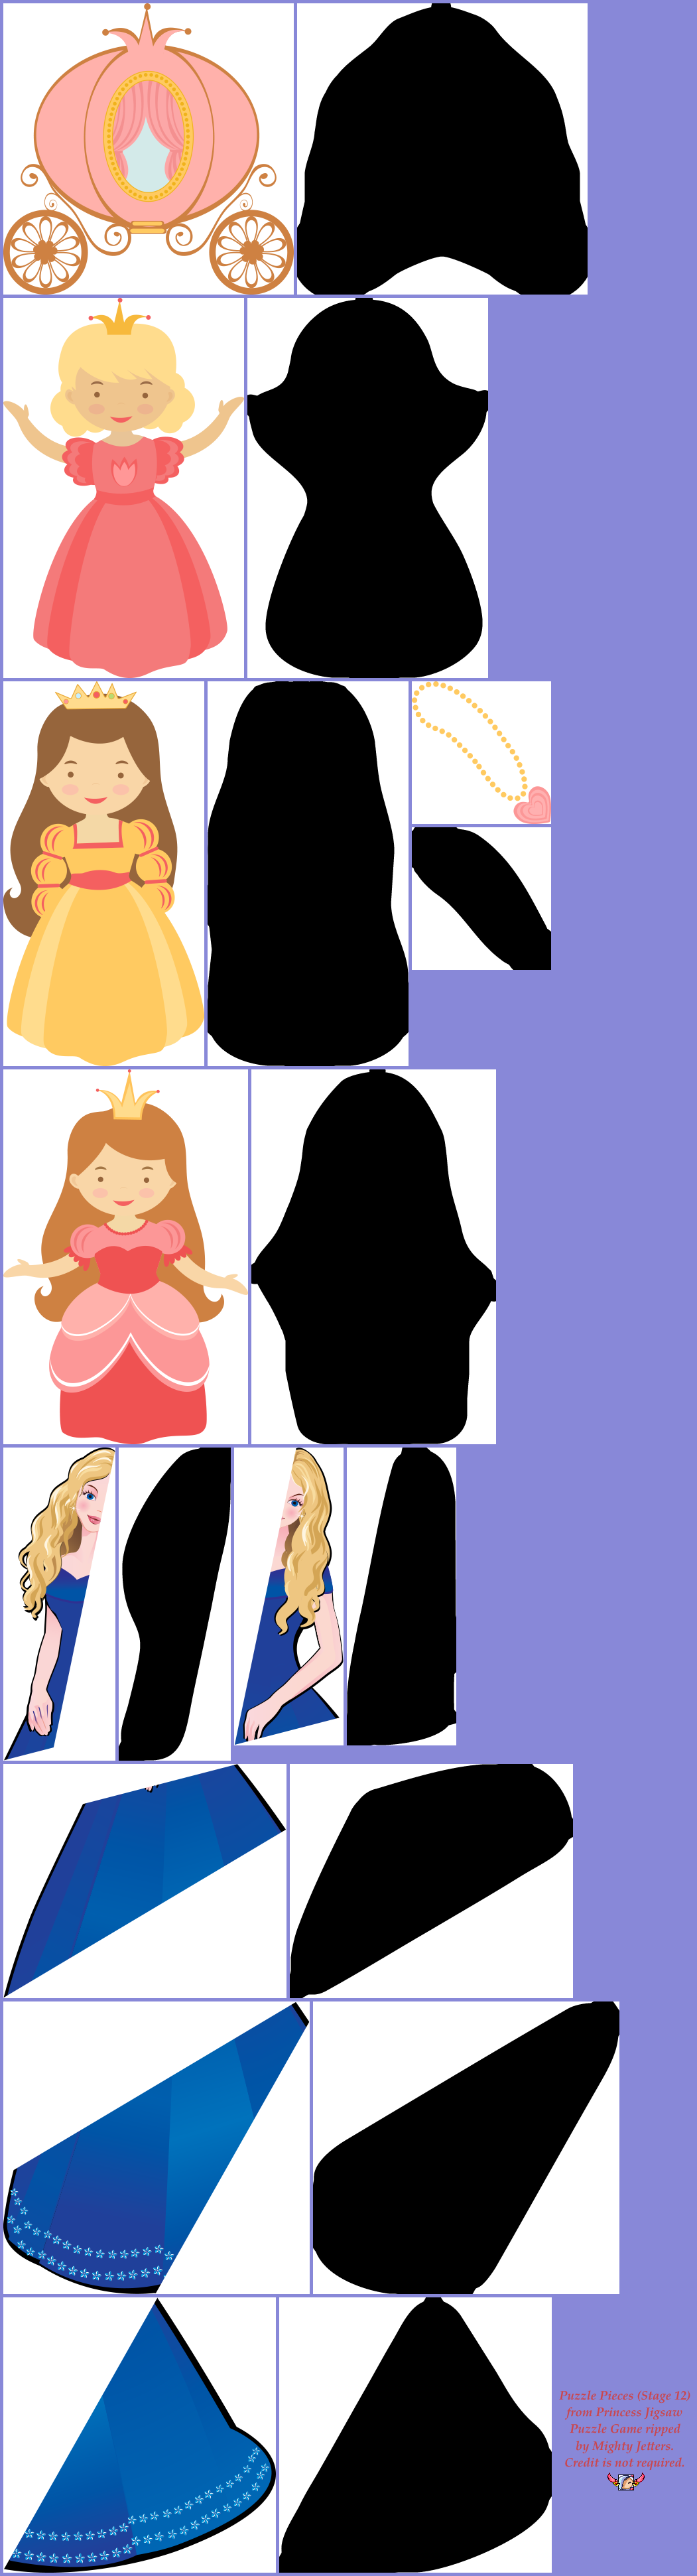 Princess Jigsaw Puzzle Game - Puzzle Pieces (Stage 12)